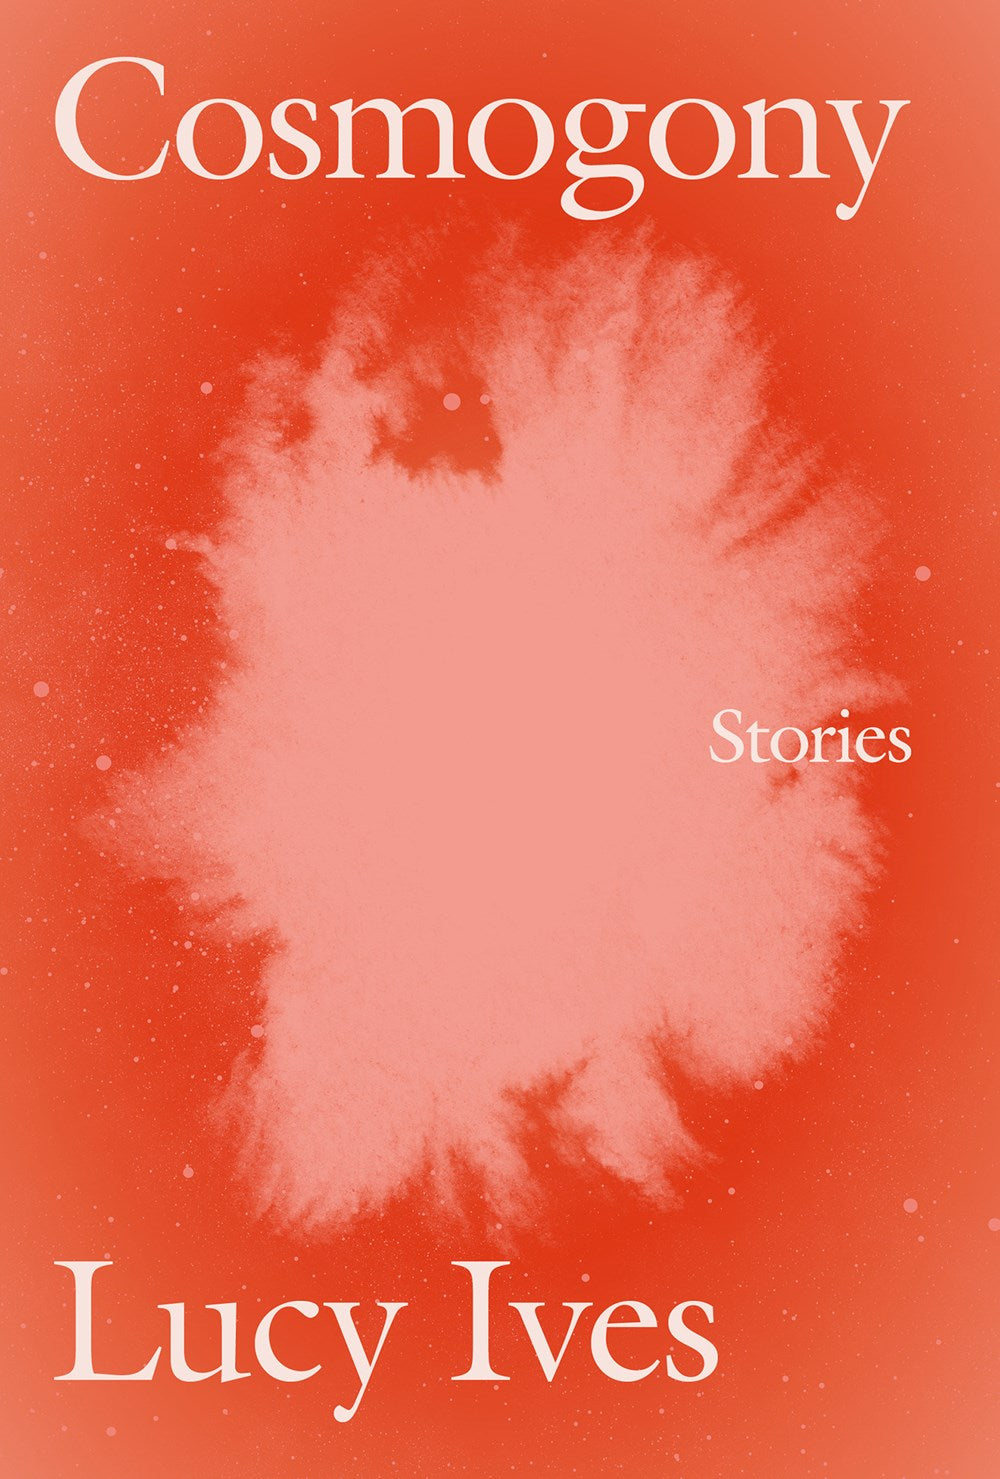 Cosmogony: Stories by Lucy Ives